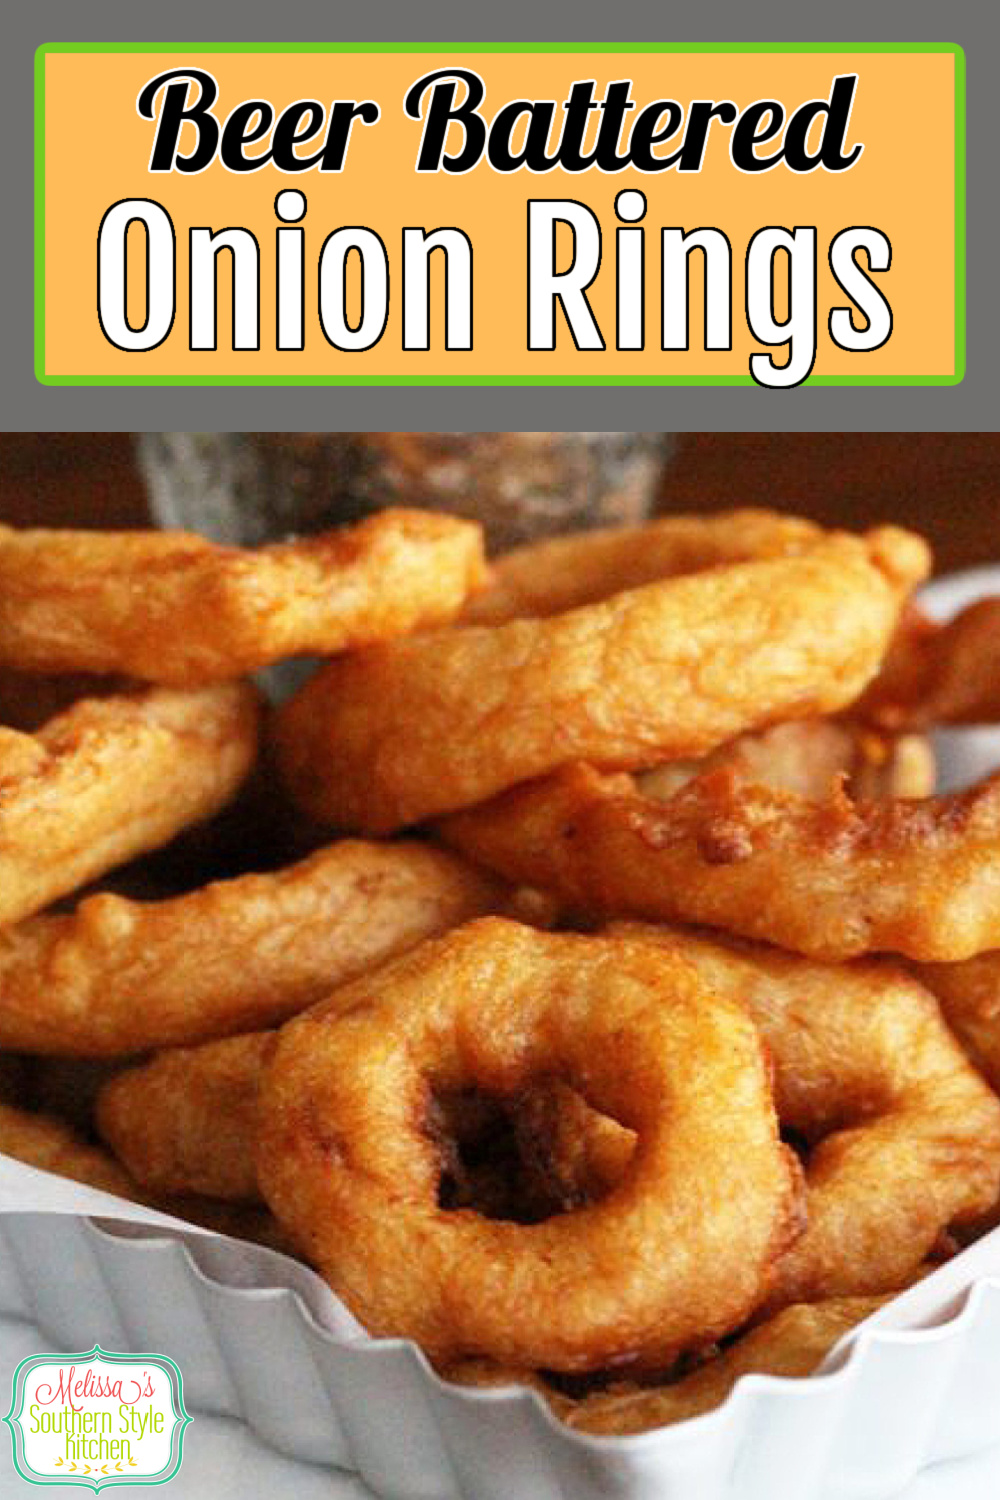 Serve these crispy Beer Battered Onion Rings as an appetizer, piled high on a burger or as a side dish #onionrings #deepfriedonionrings #beerbatteredonionrings #beer #beerbatter #onions #appetizers #partyfood #footballfood #sidedish #southernfood #southernrecipes